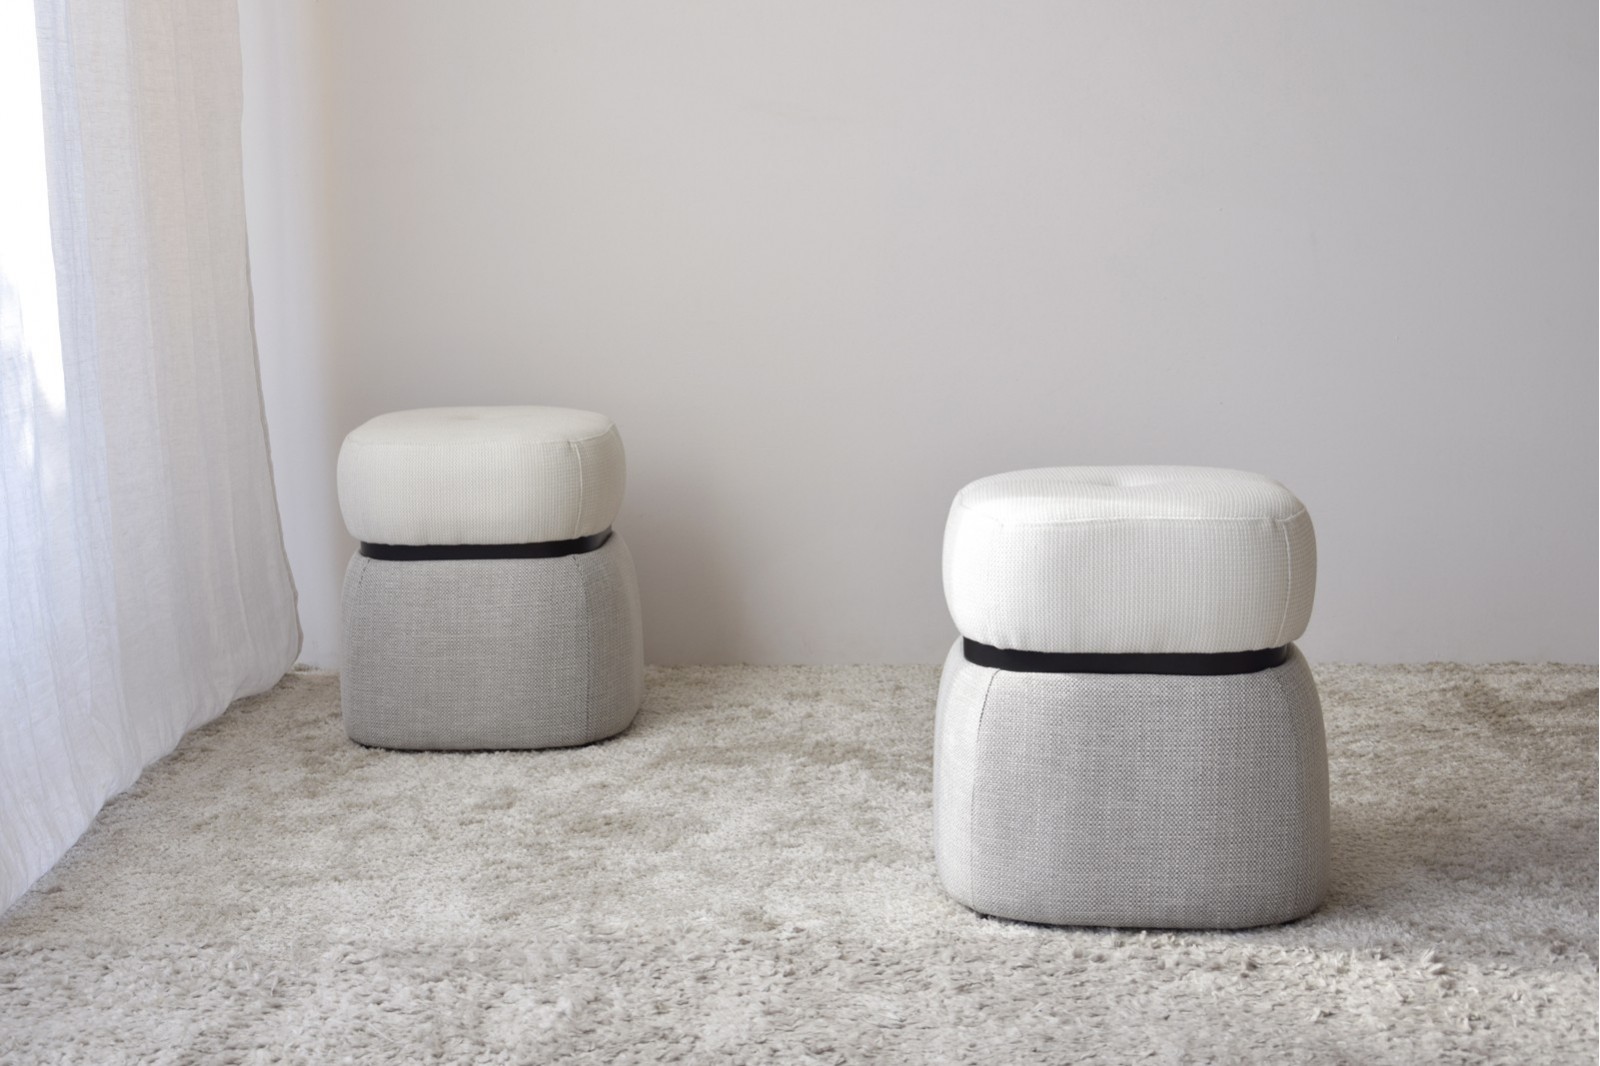 SET 2 SQUARE POUFS. IVORY AND GREY TONES